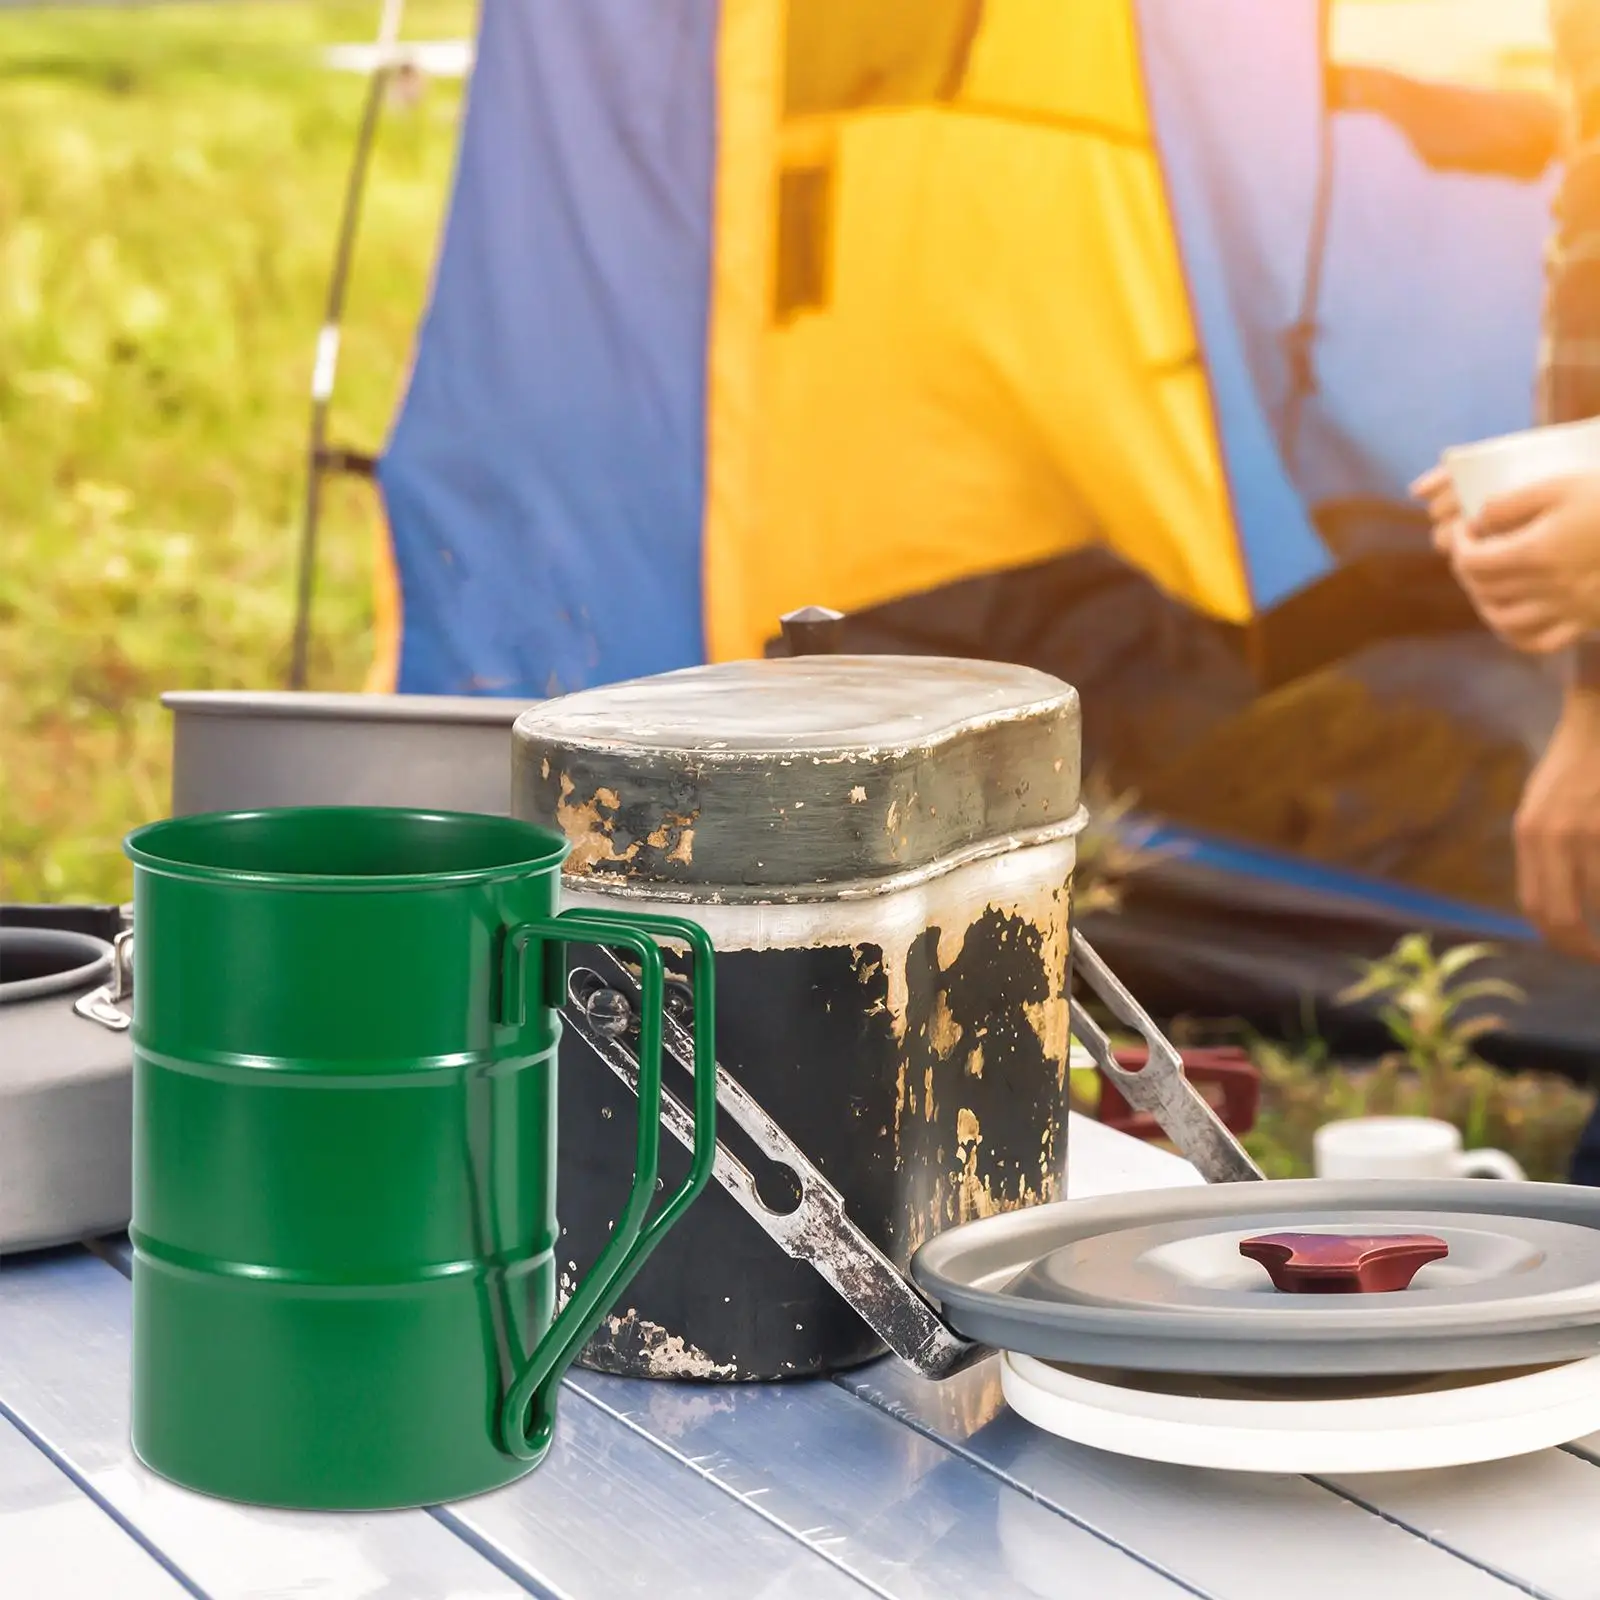 Stainless Steel Camping Mug Cooking Pot Reusable Coffee Cup Gift Vintage Style